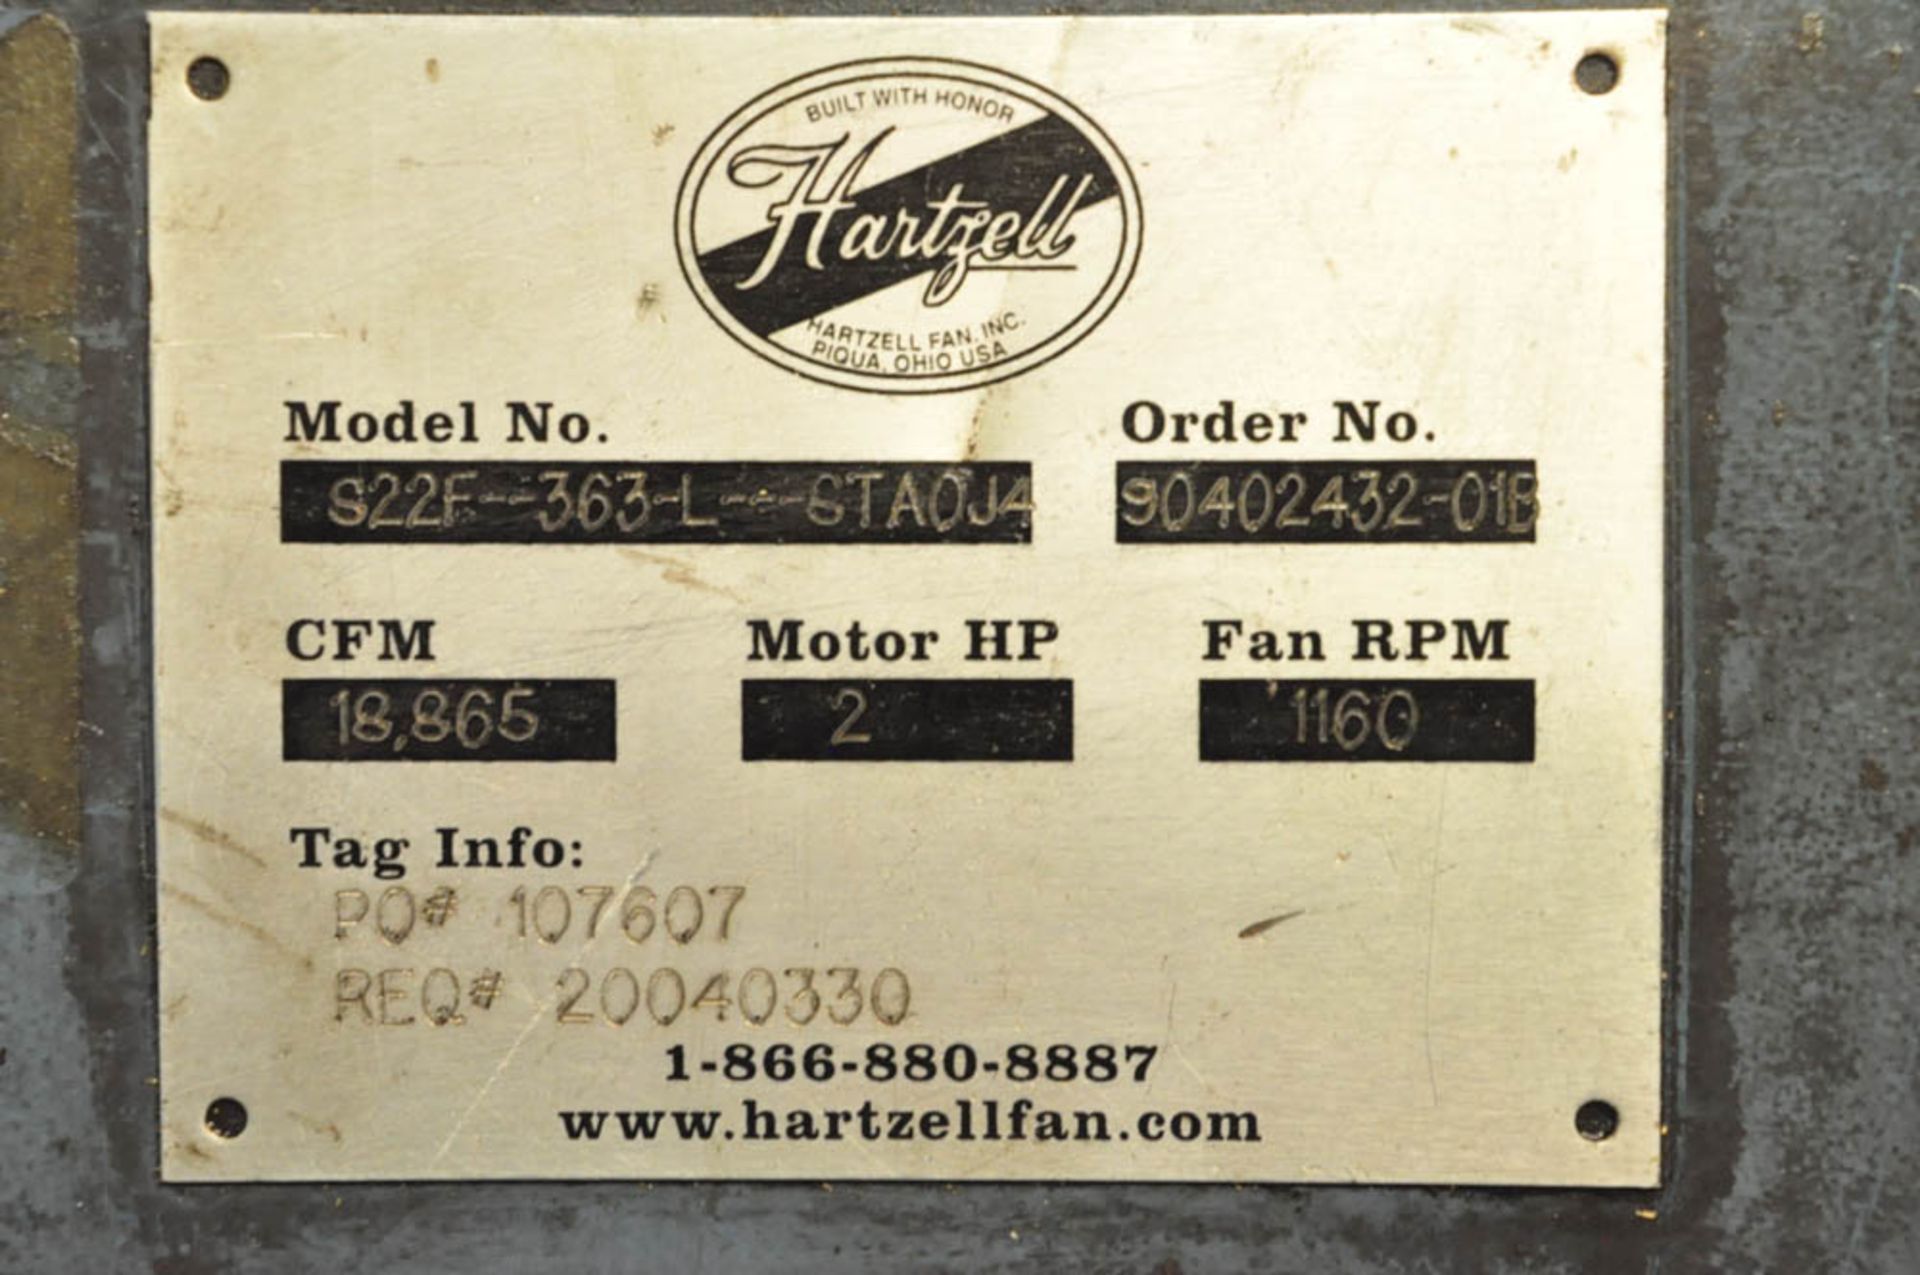 HARTZELL 36" PORTABLE DRUM FAN, S/N:S22F-363-L-STA0J4, THREE PHASE - Image 2 of 2